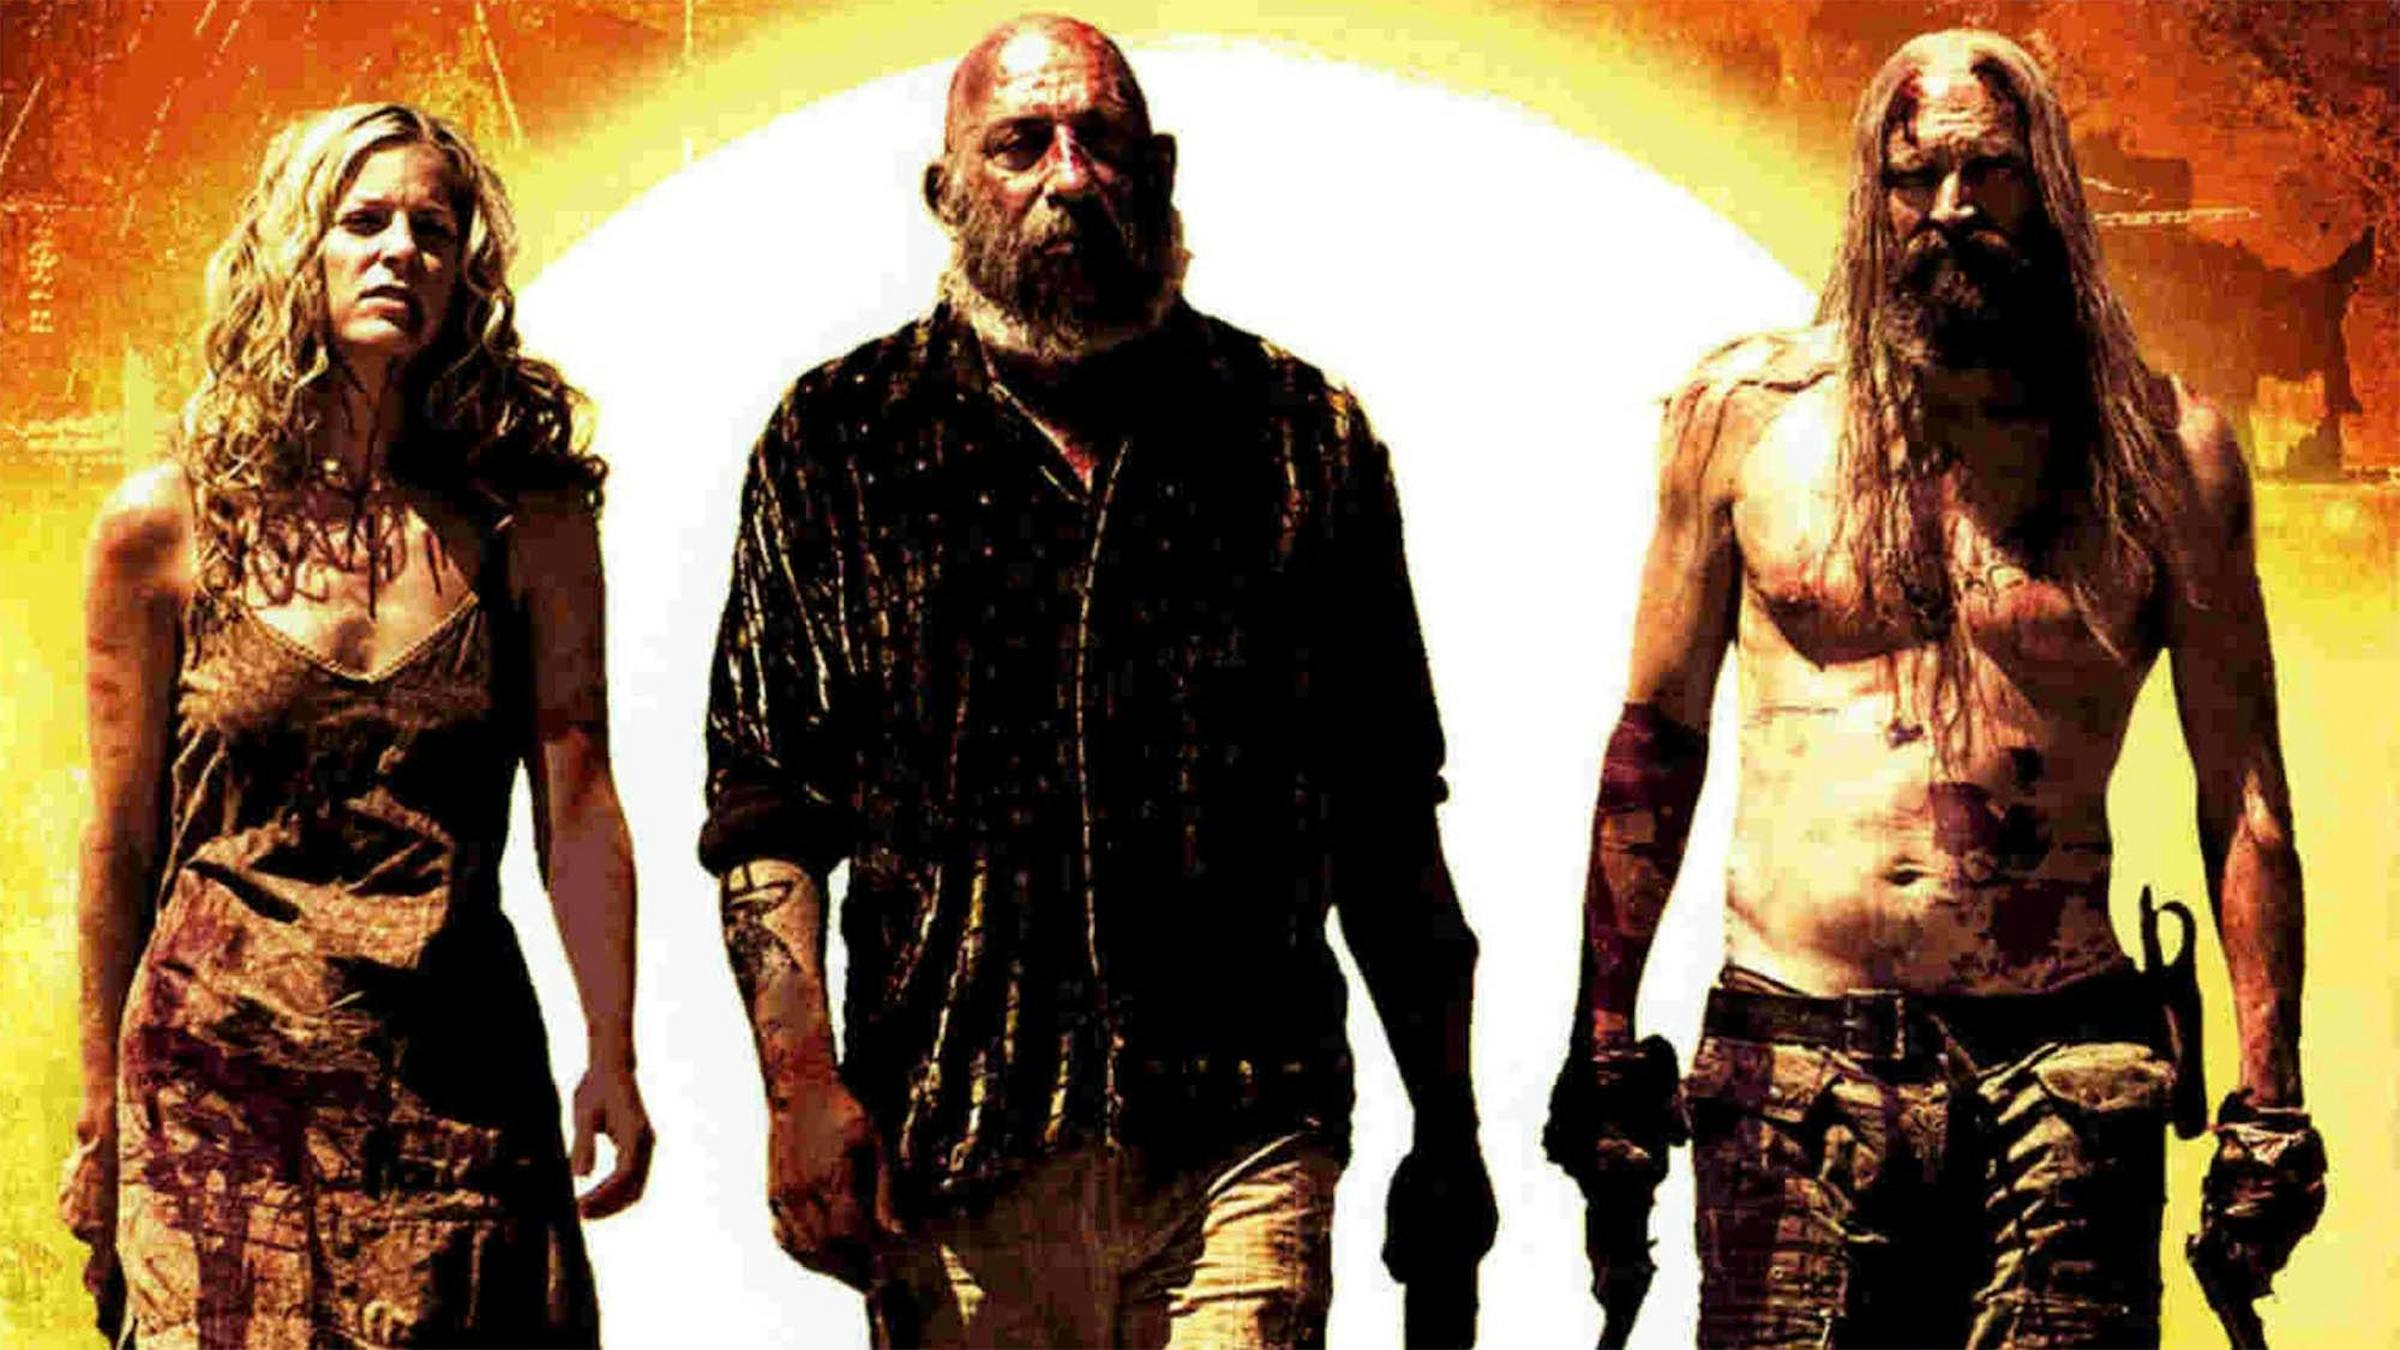 Rob Zombie's 3 From Hell Gets Official Release Date, Poster Art